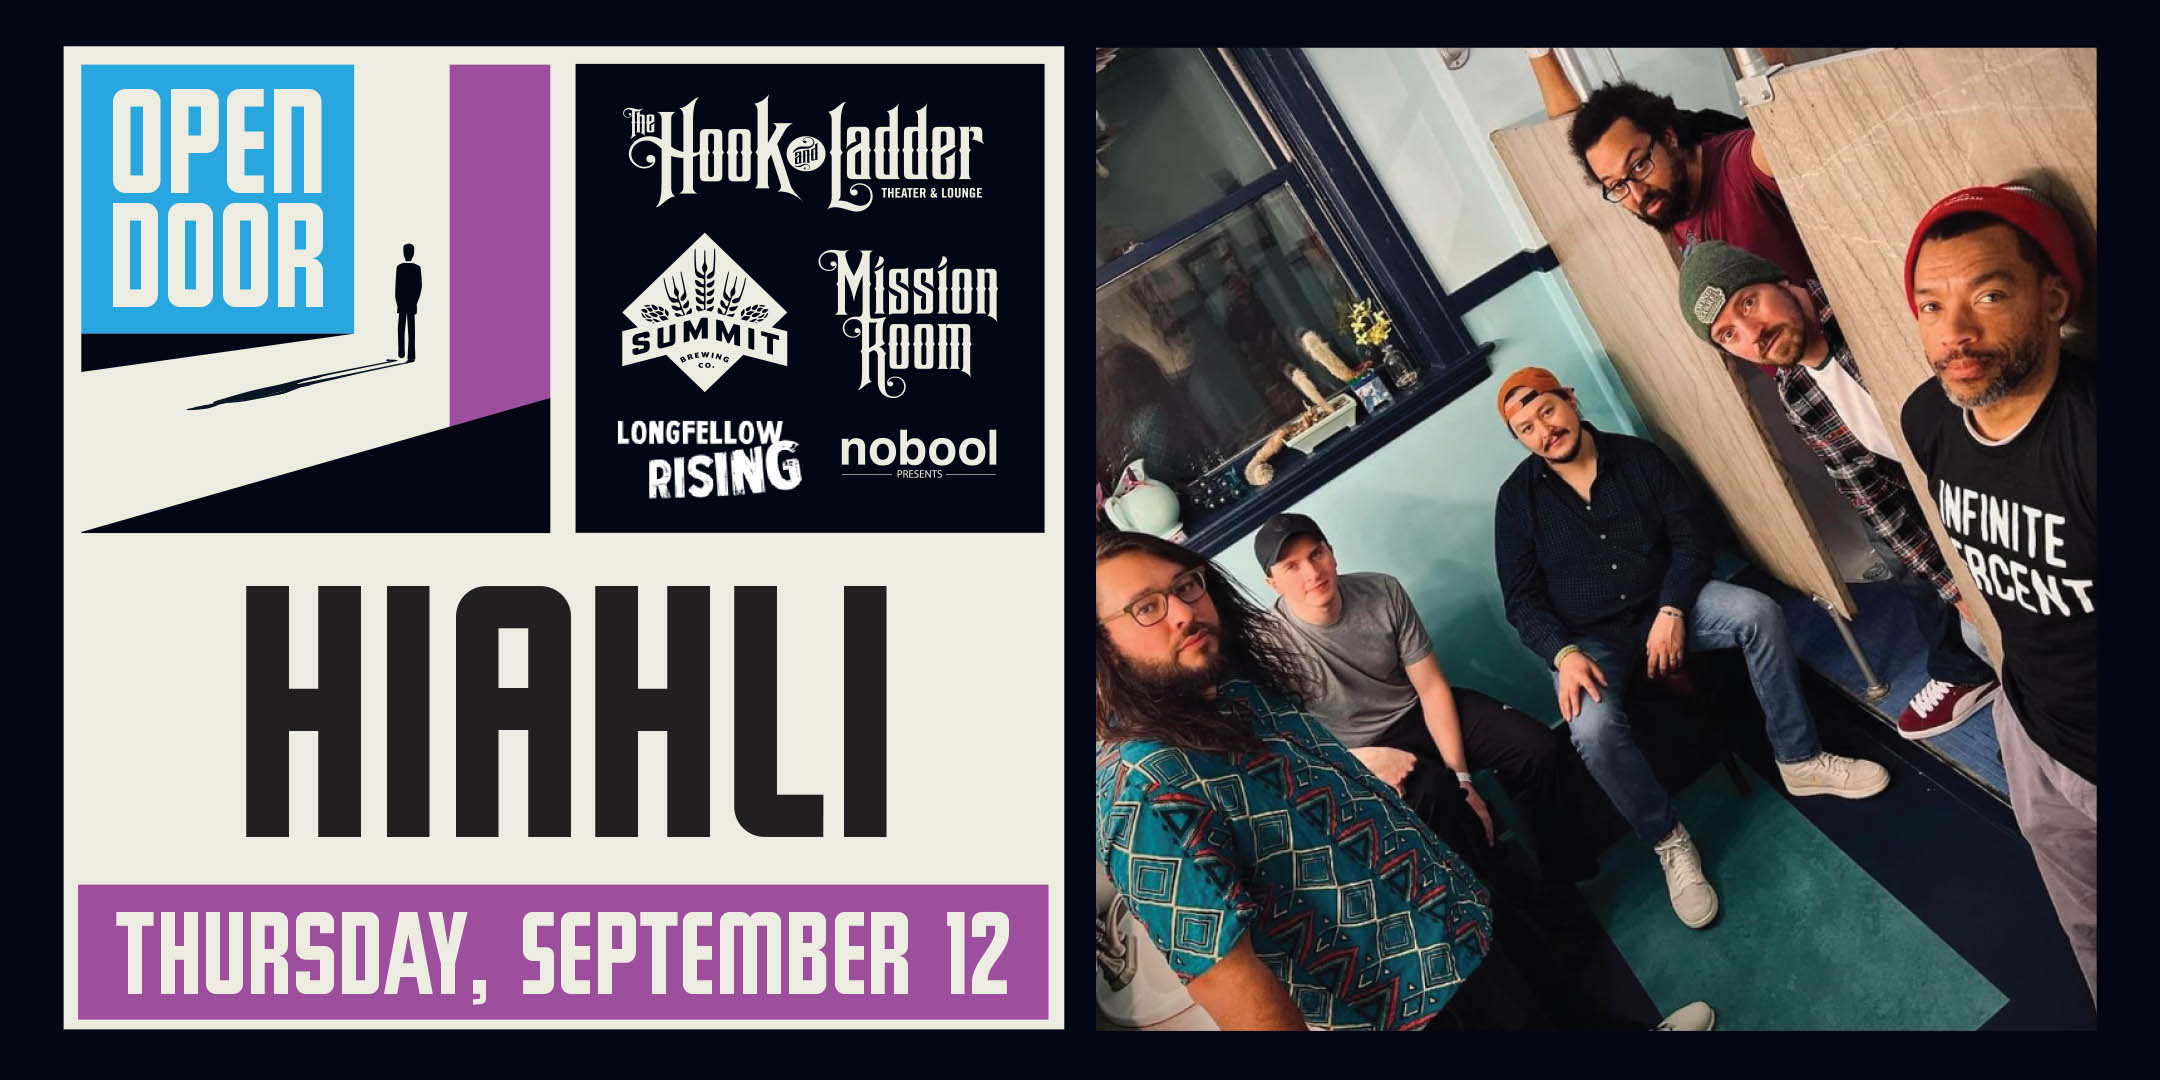 Summit Brewing & Longfellow Rising presents Open Door Series: HIAHLI Thursday, September 12 at The Hook and Ladder's Mission Room Doors 5pm :: Music 7-10pm :: 21+ FREE $5.01 Online Advance Donation (Includes a Summit Beer & 21+ Wristband*) $10 Donation at The Door (Includes a Summit Beer & 21+ Wristband*)